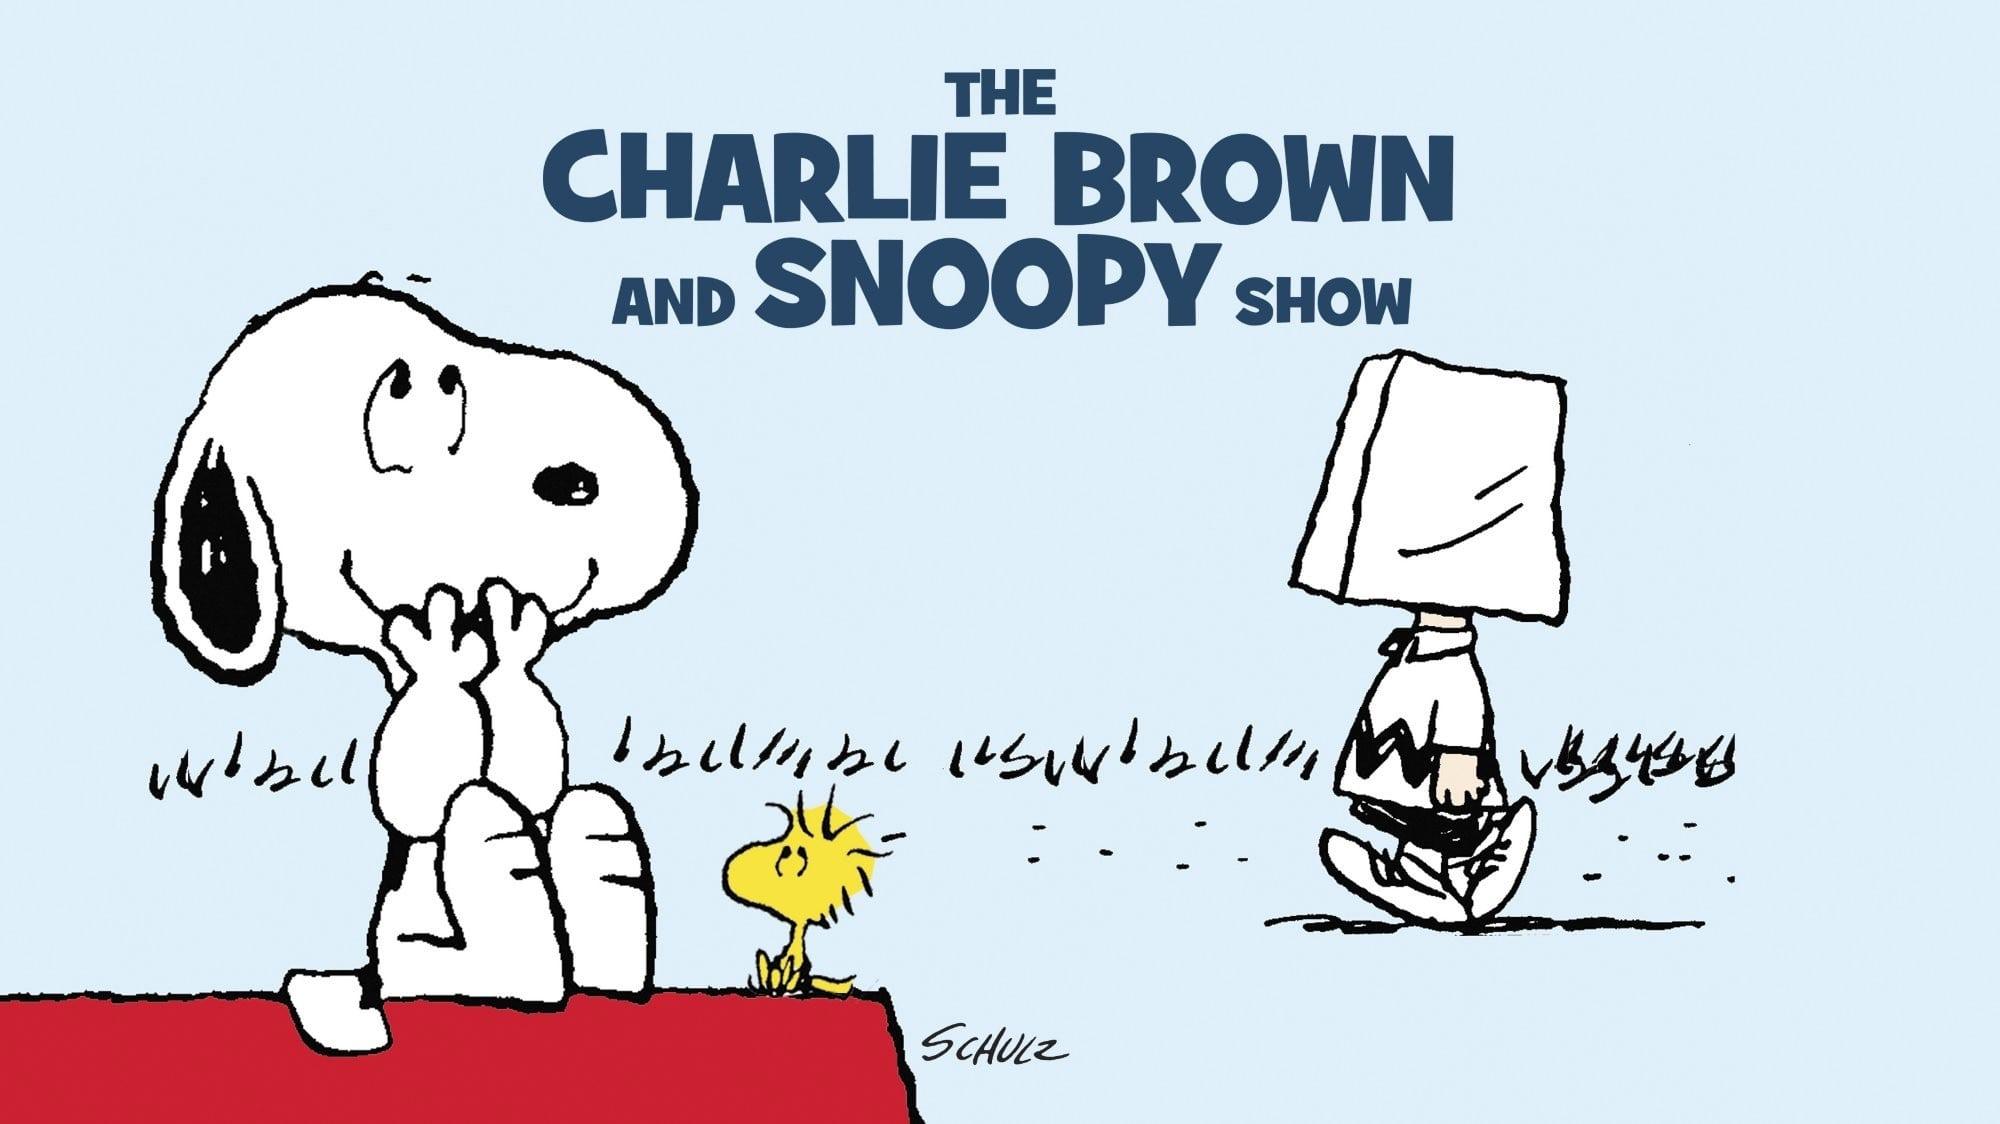 The Charlie Brown and Snoopy Show backdrop